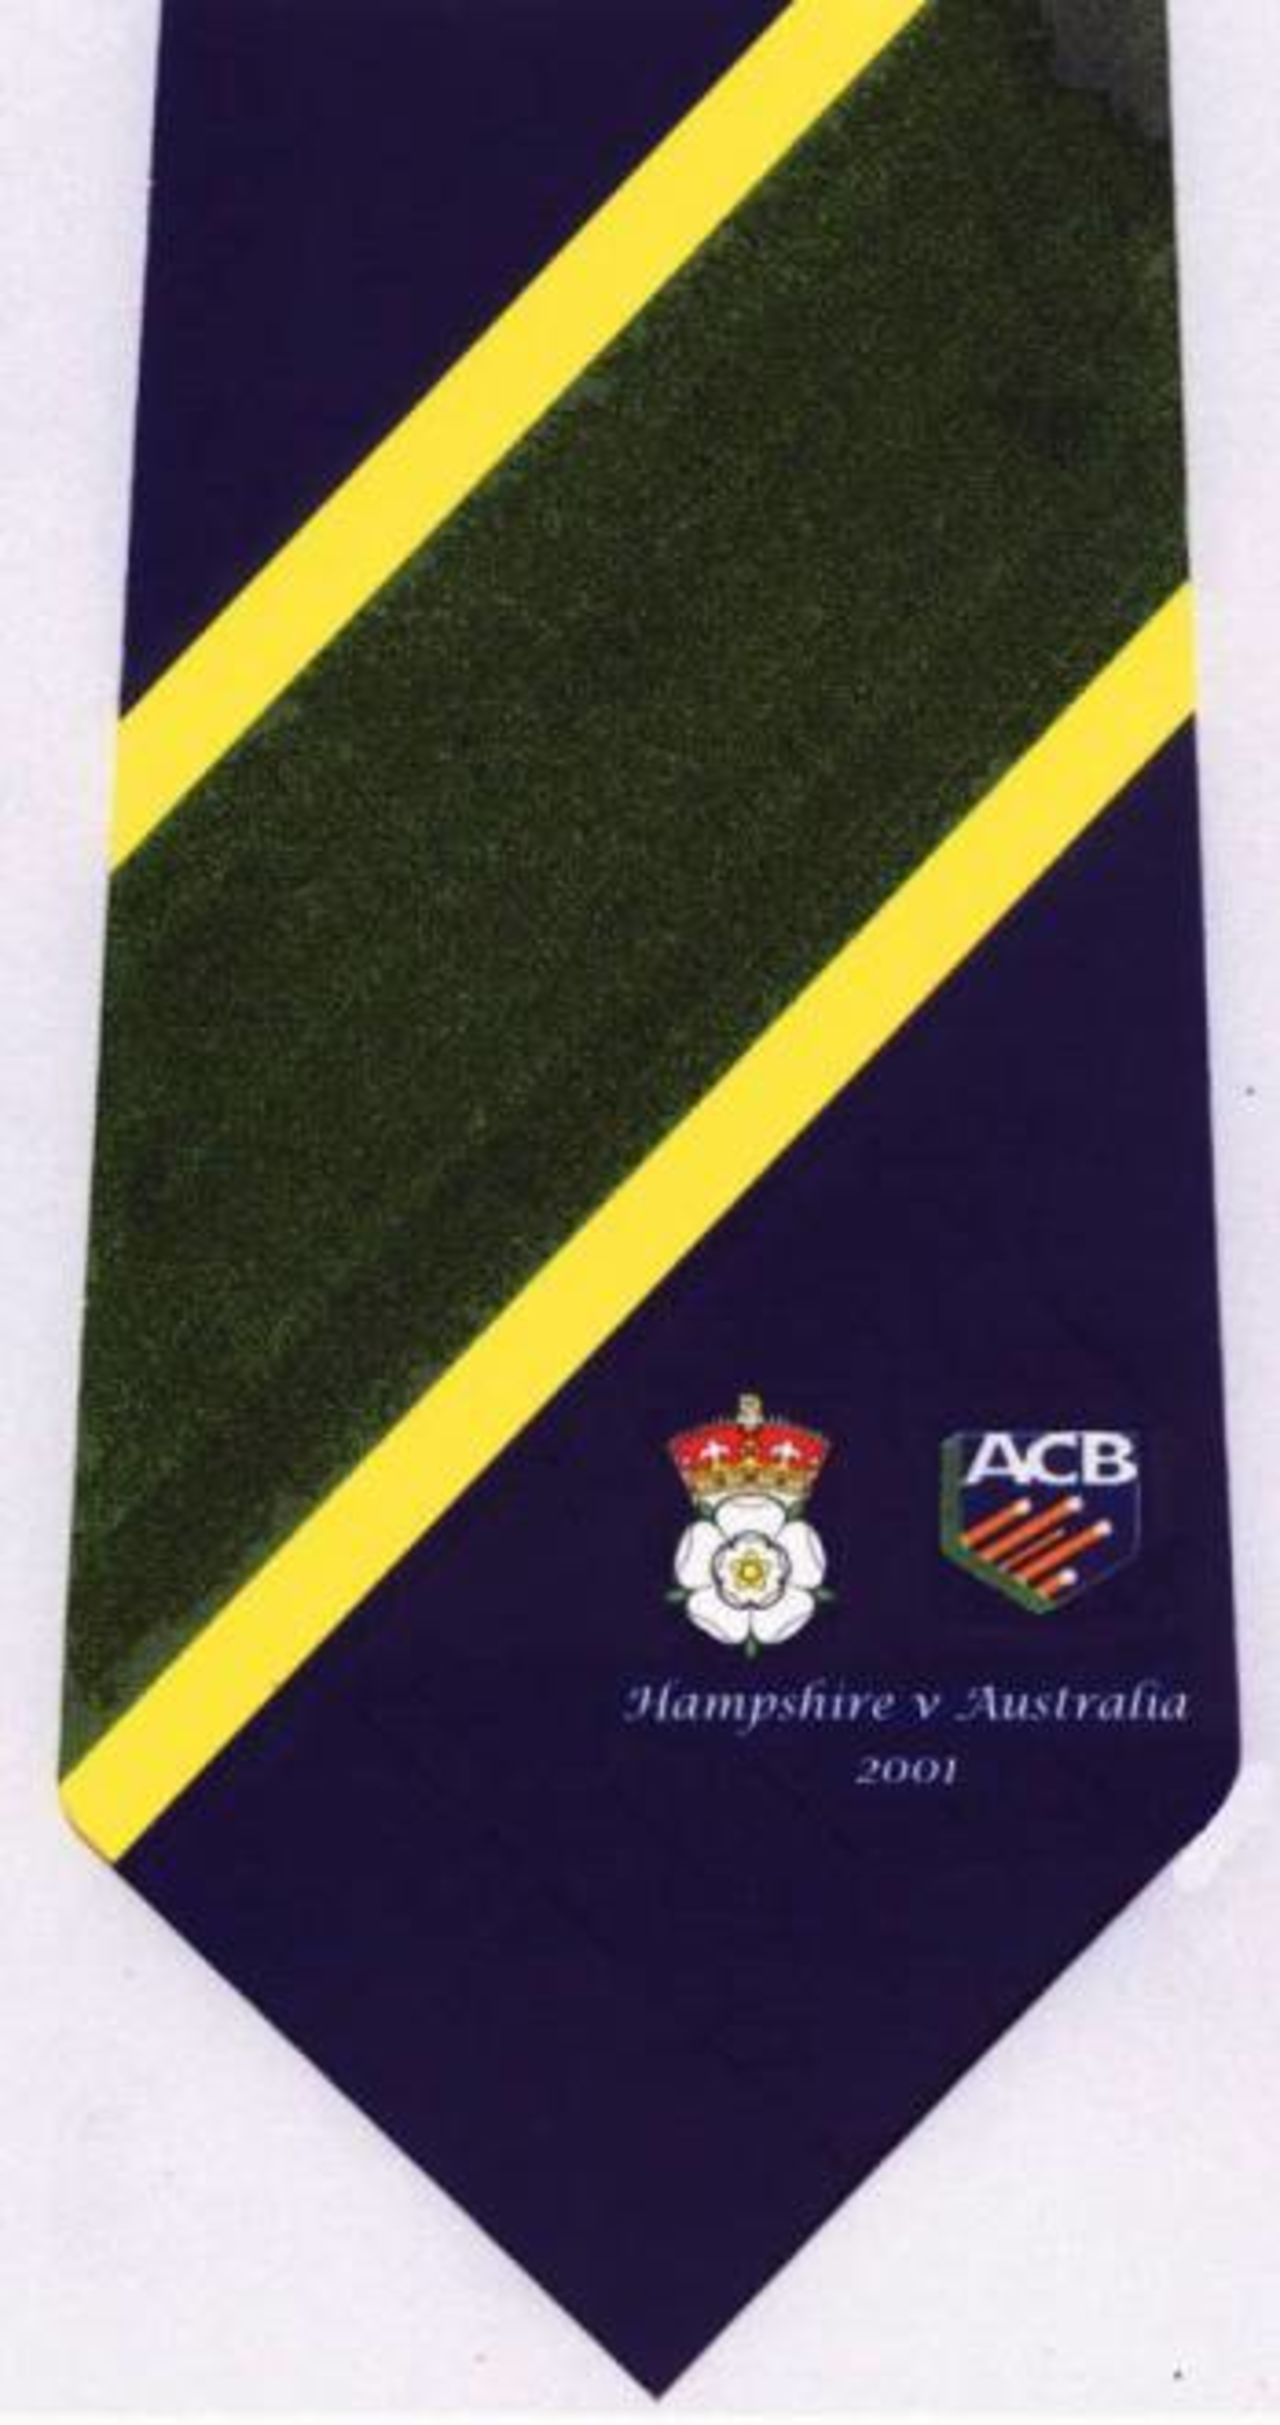 Special tie to commemorate Hampshire's victory over the World Champions.